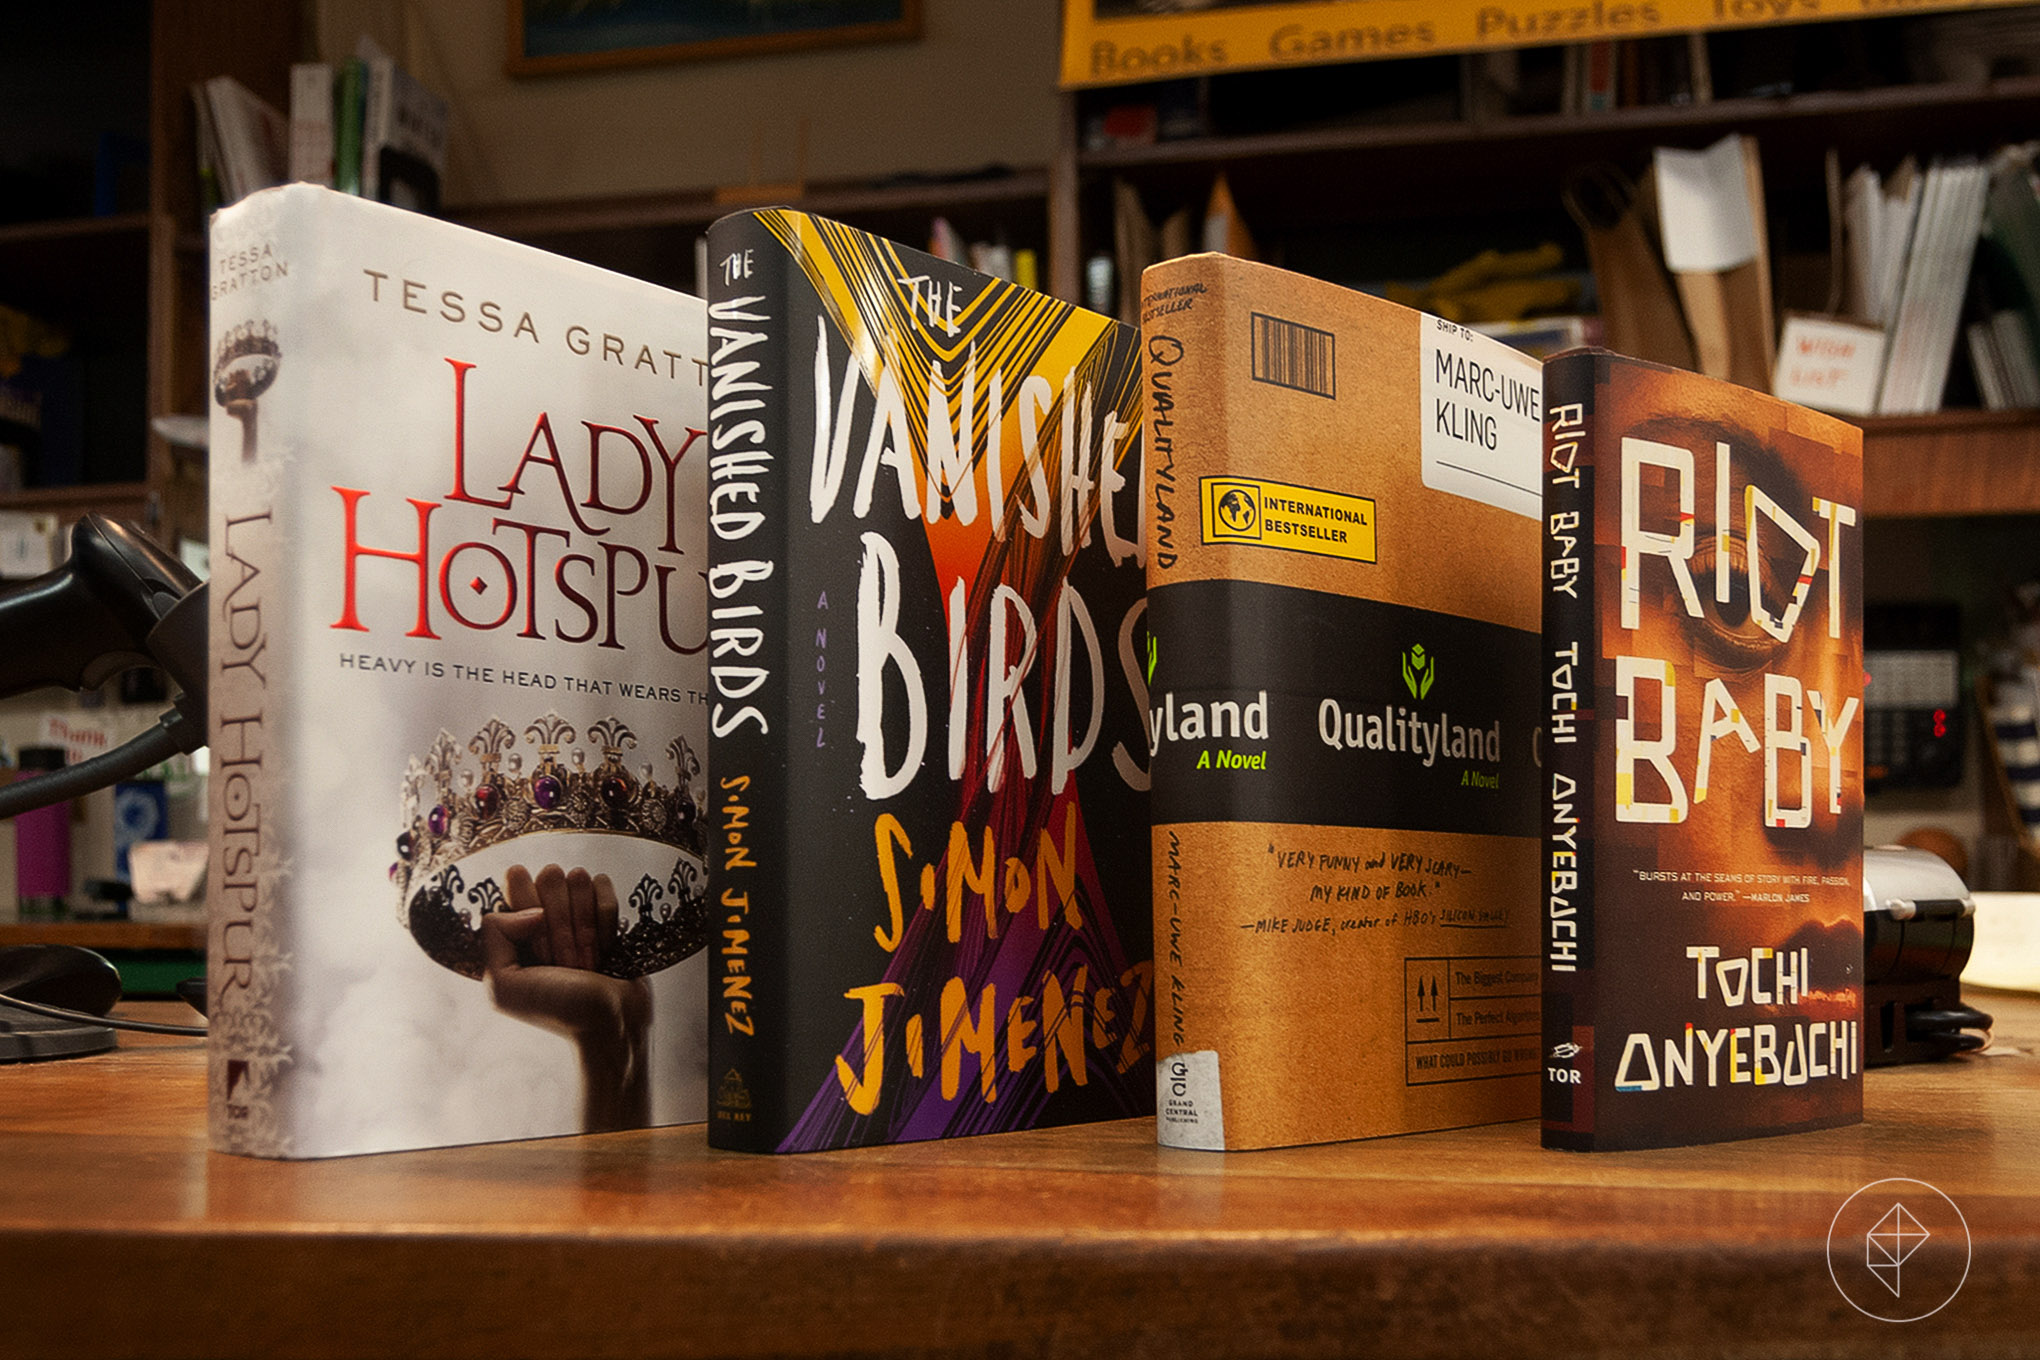 Four books stood upright on a a book store counter